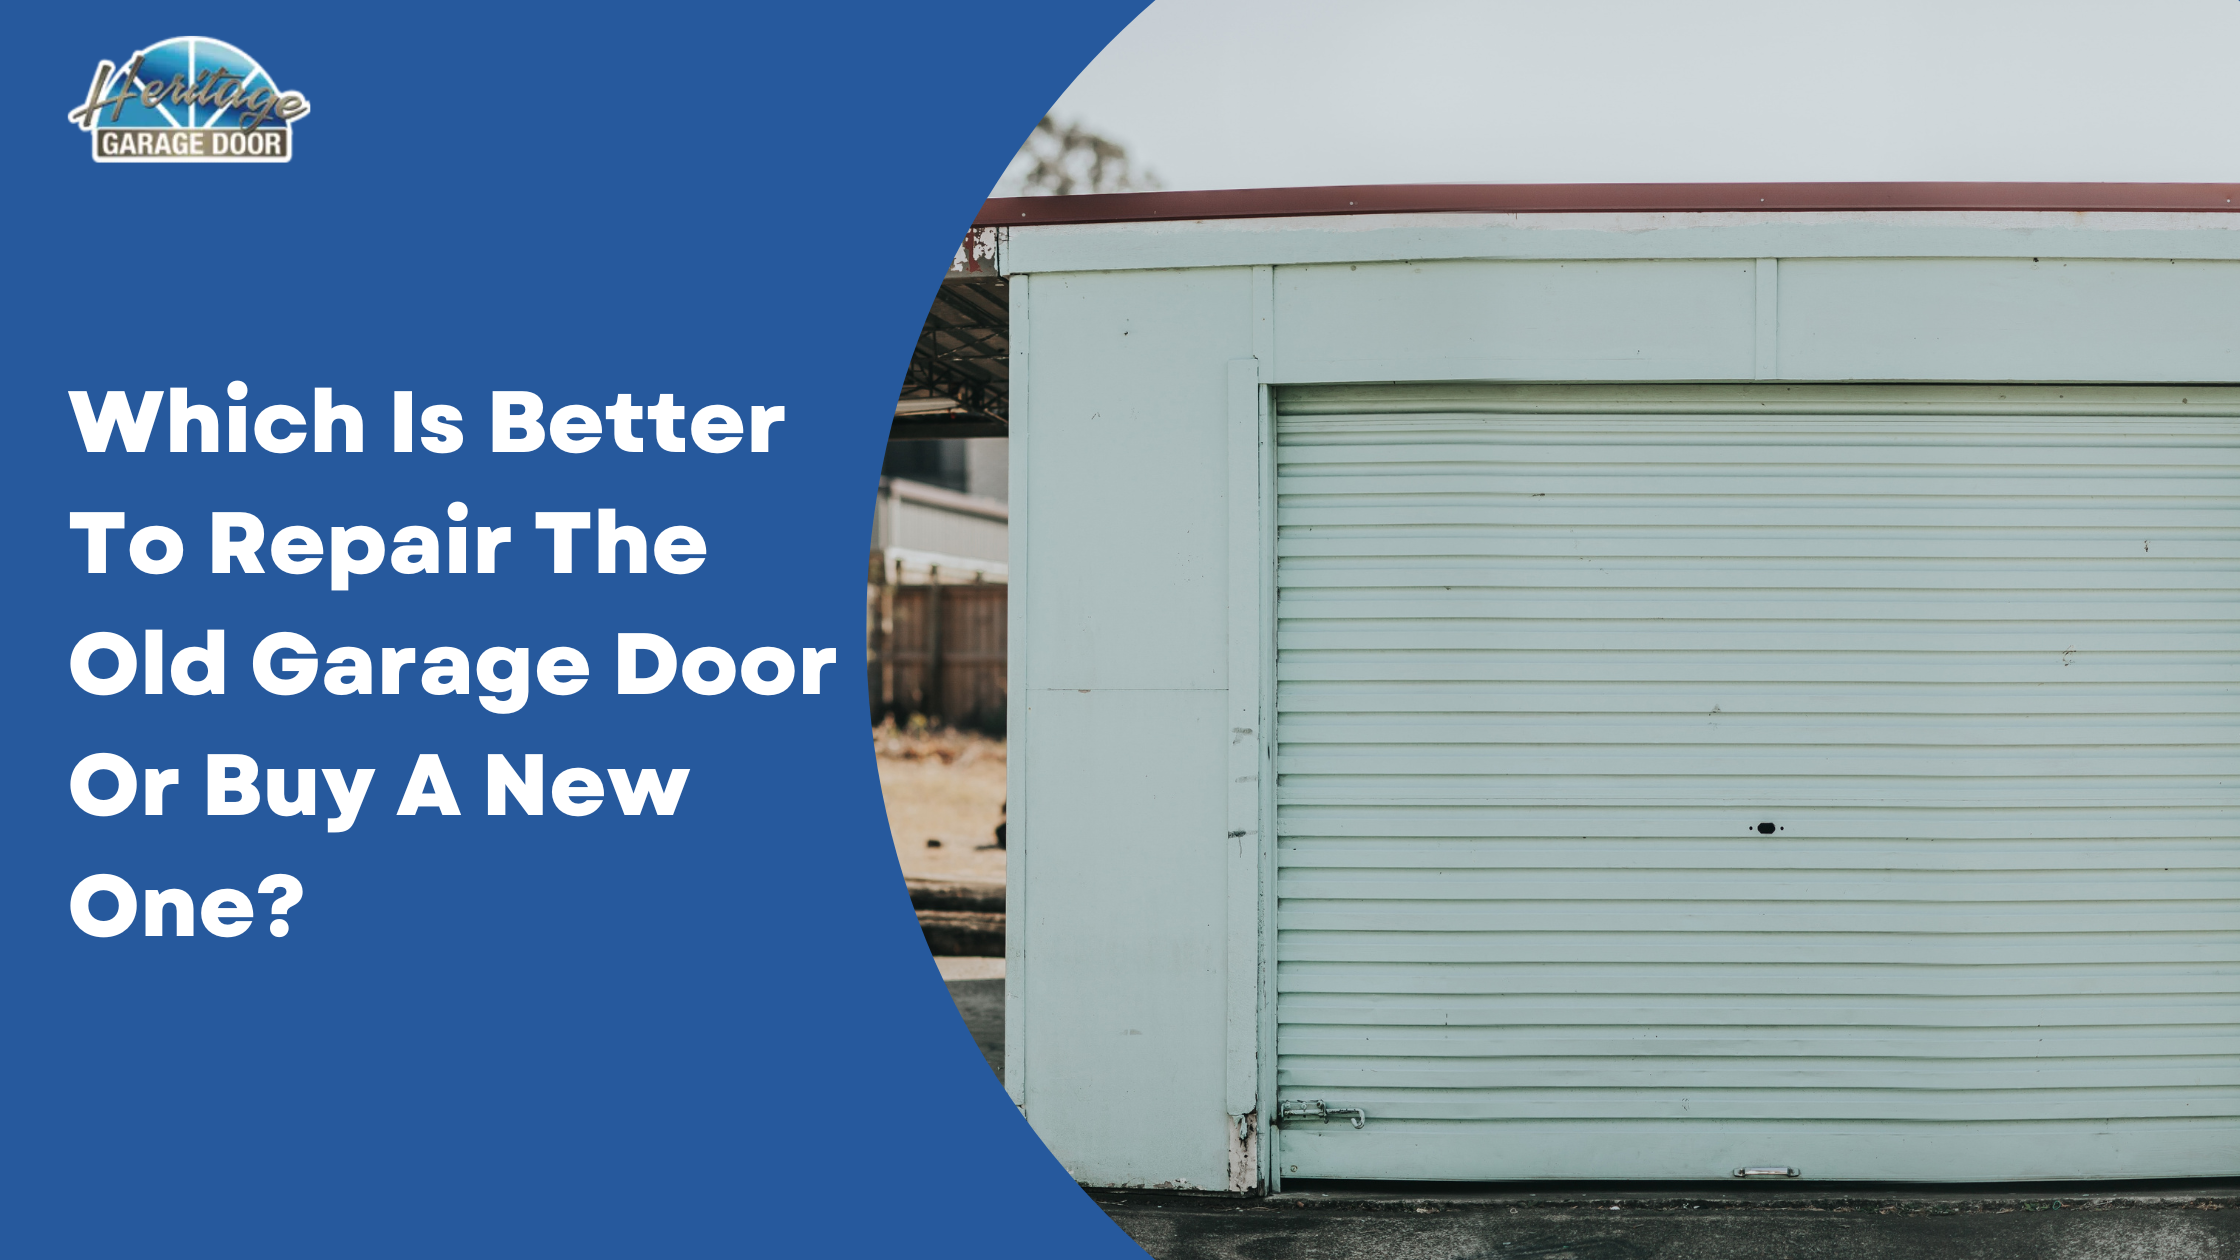 Which Is Better To Repair The Old Garage Door Or Buy A New One